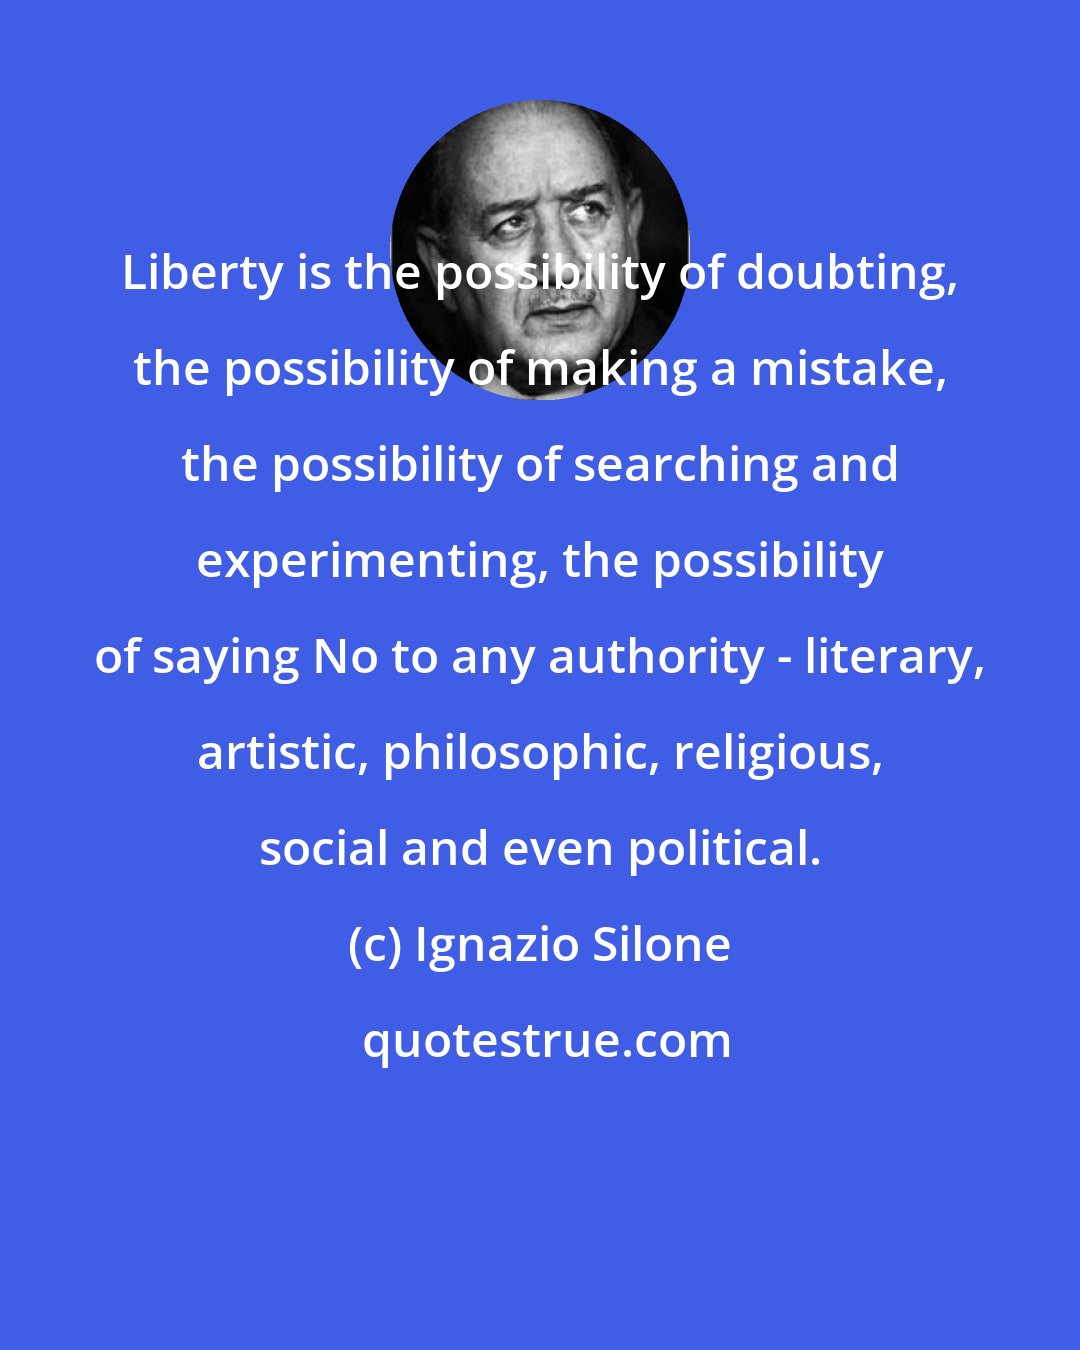 Ignazio Silone: Liberty is the possibility of doubting, the possibility of making a mistake, the possibility of searching and experimenting, the possibility of saying No to any authority - literary, artistic, philosophic, religious, social and even political.